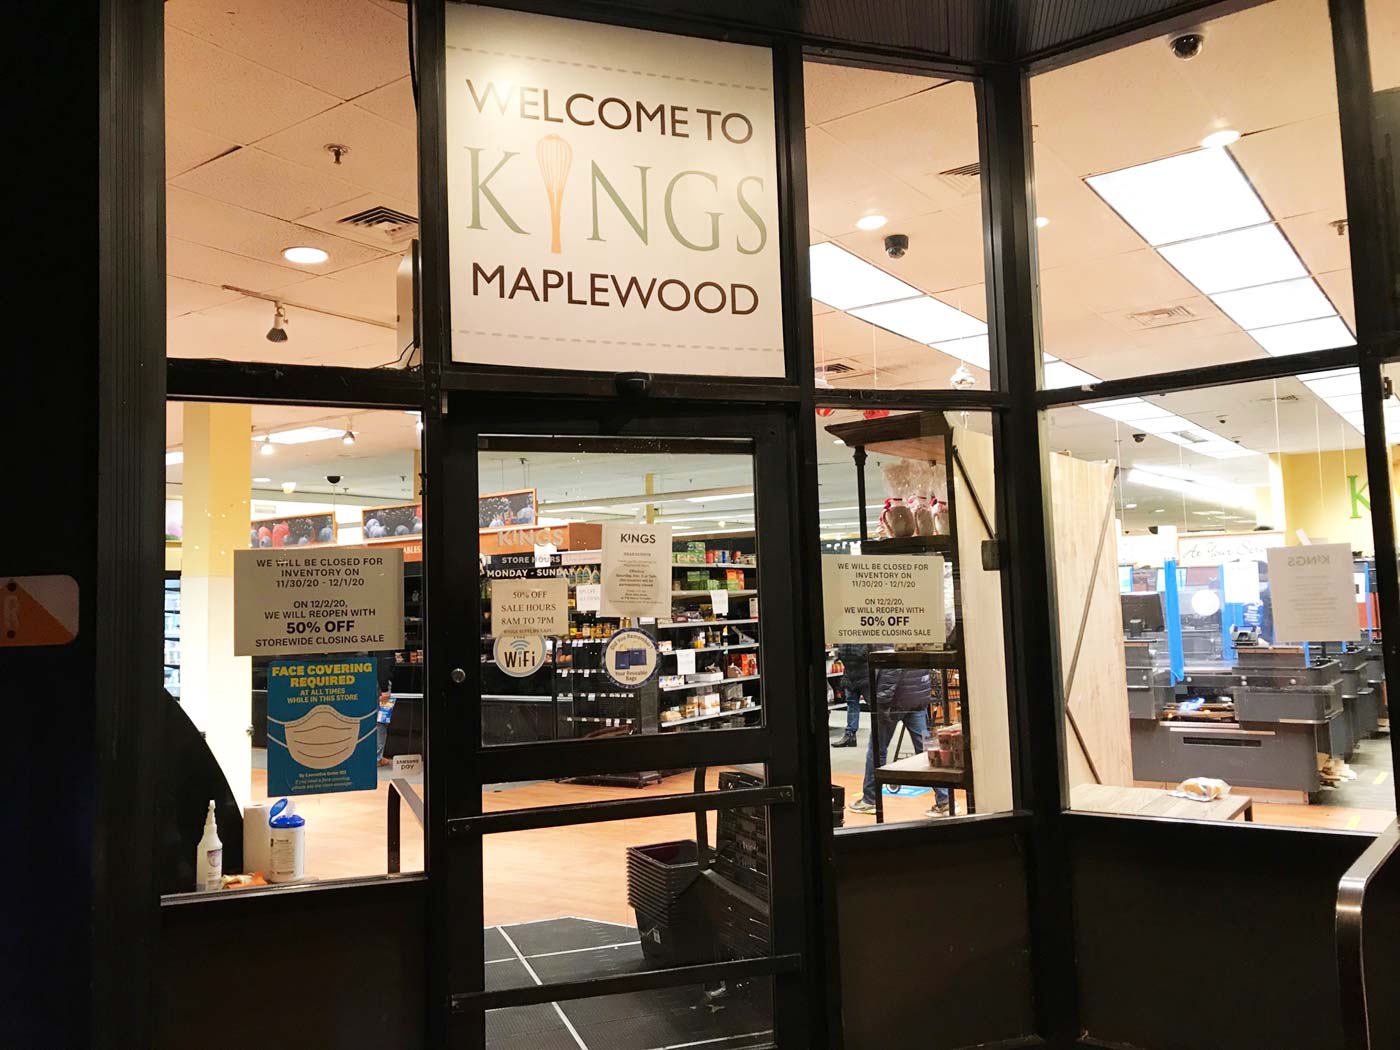 Welcome to Kings Maplewood - Kings Food Market entrance